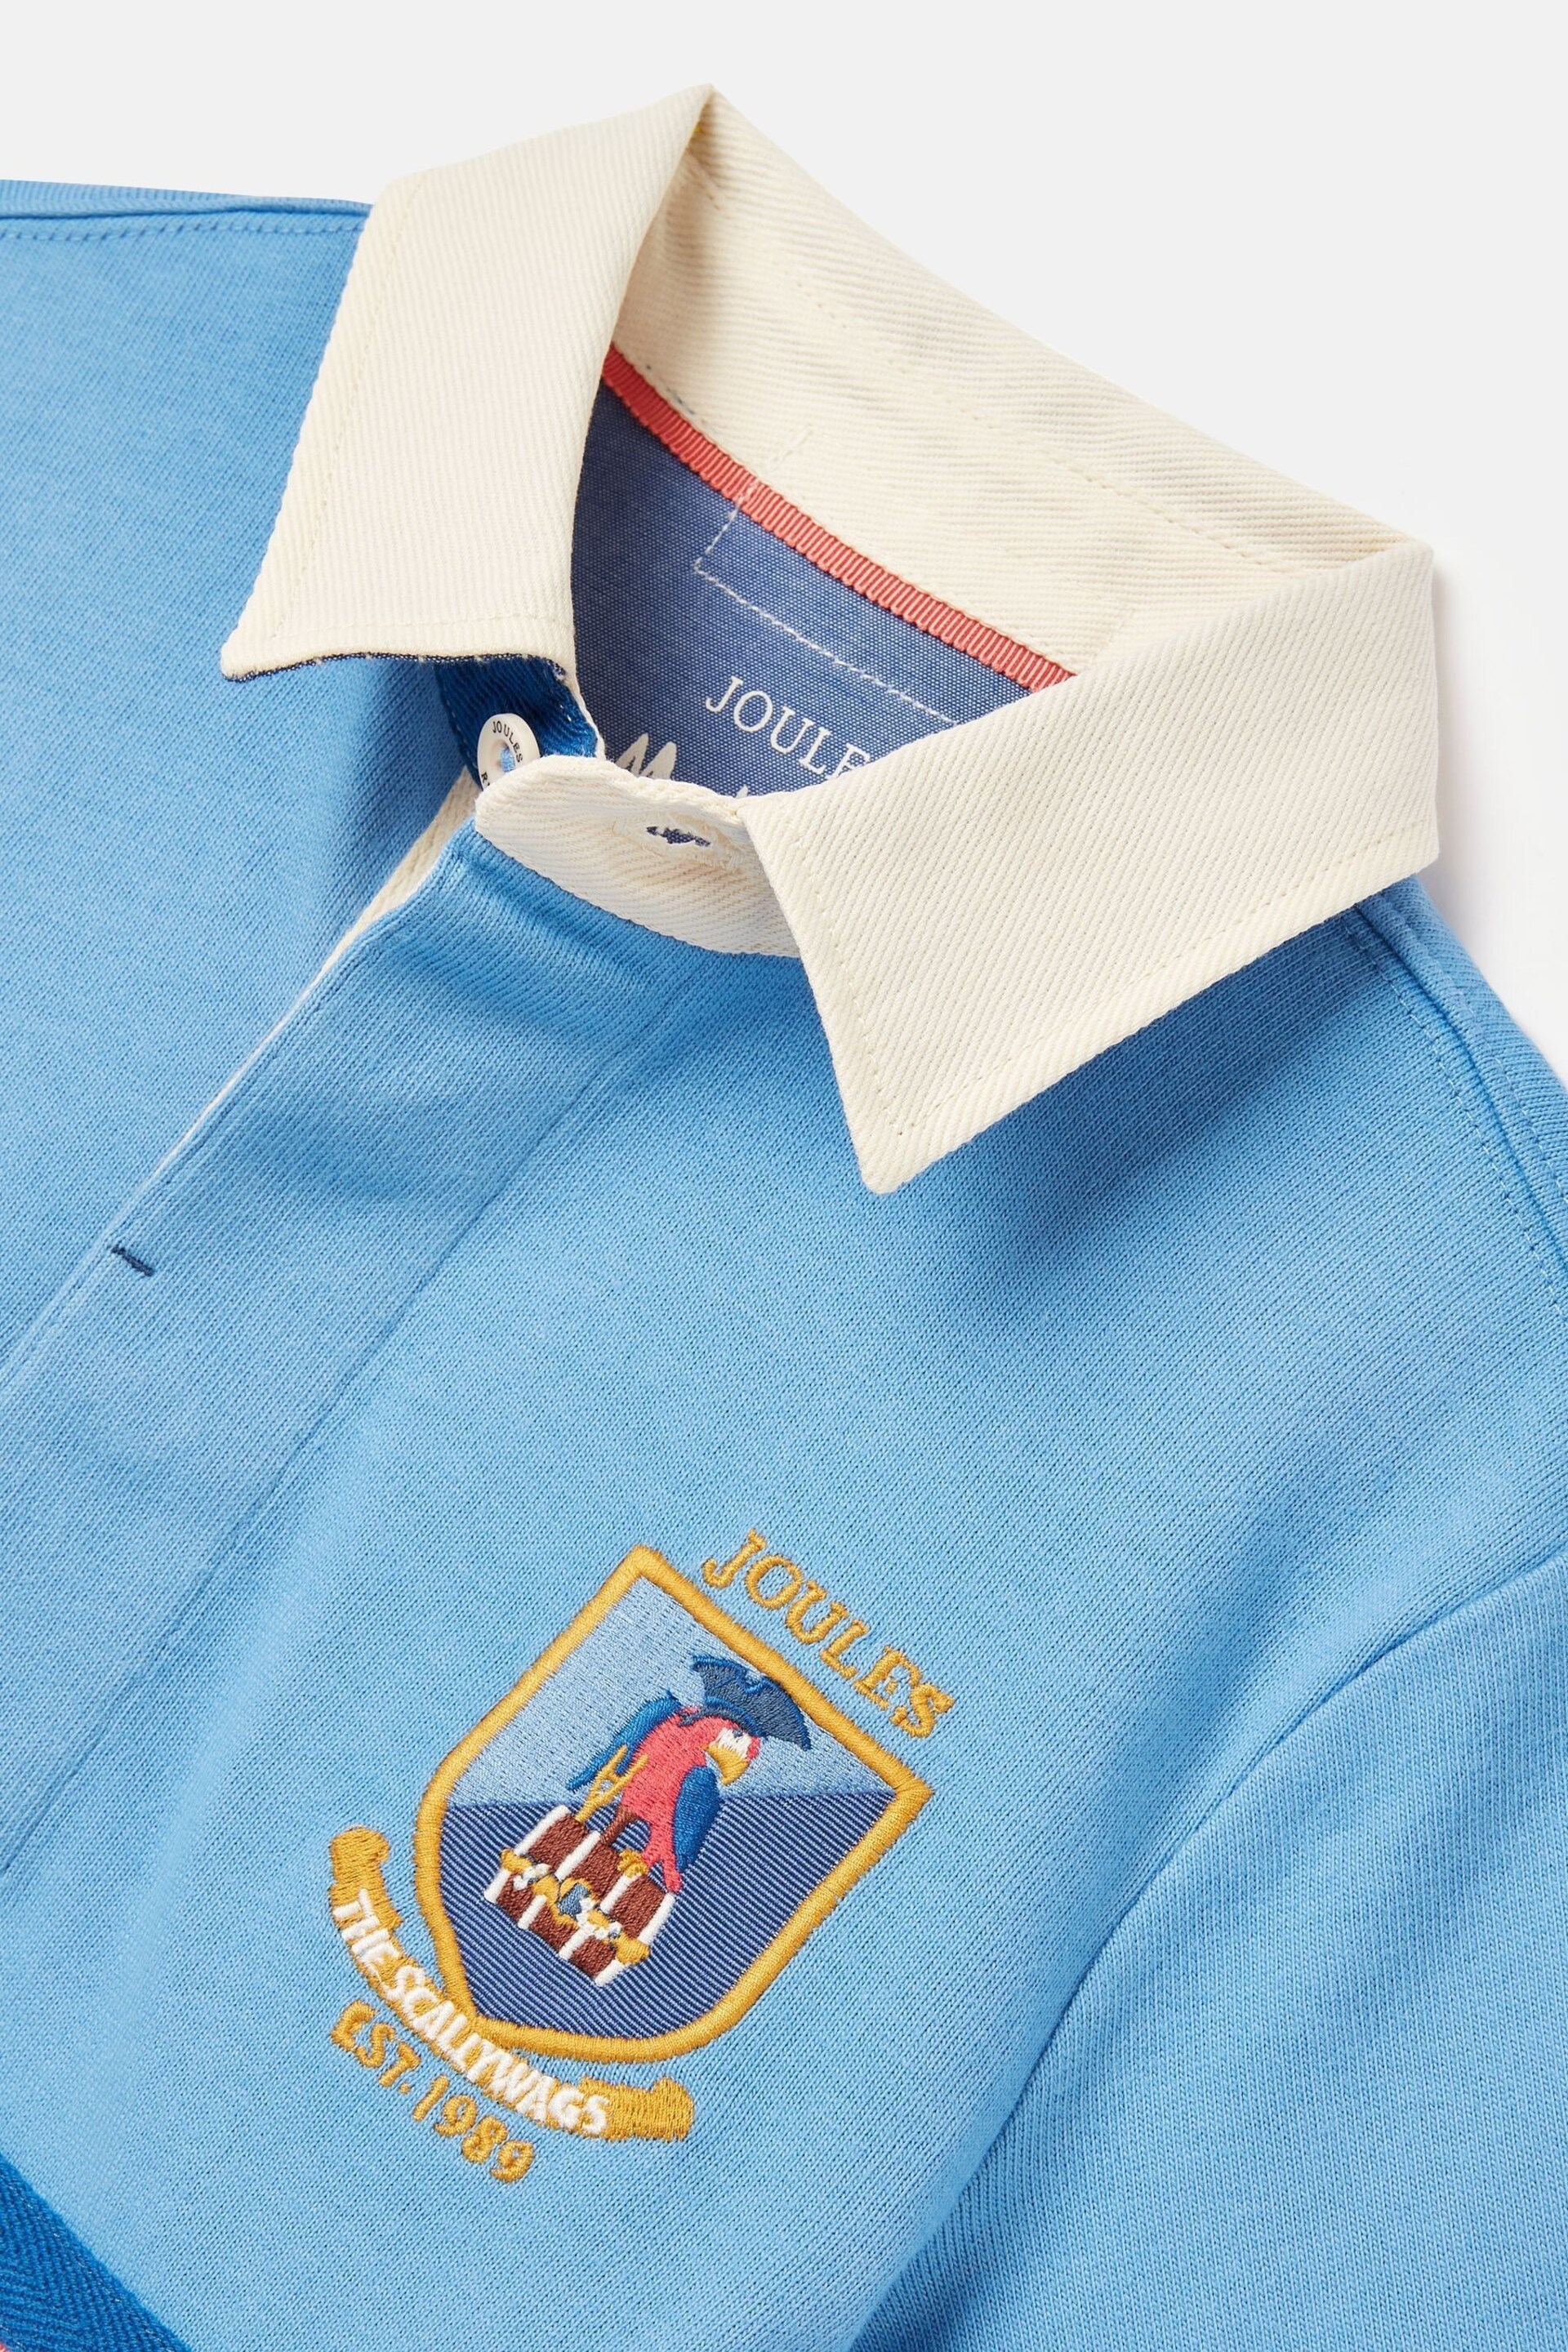 Joules Tournament Blue Rugby Jersey Polo Shirt - Image 5 of 6